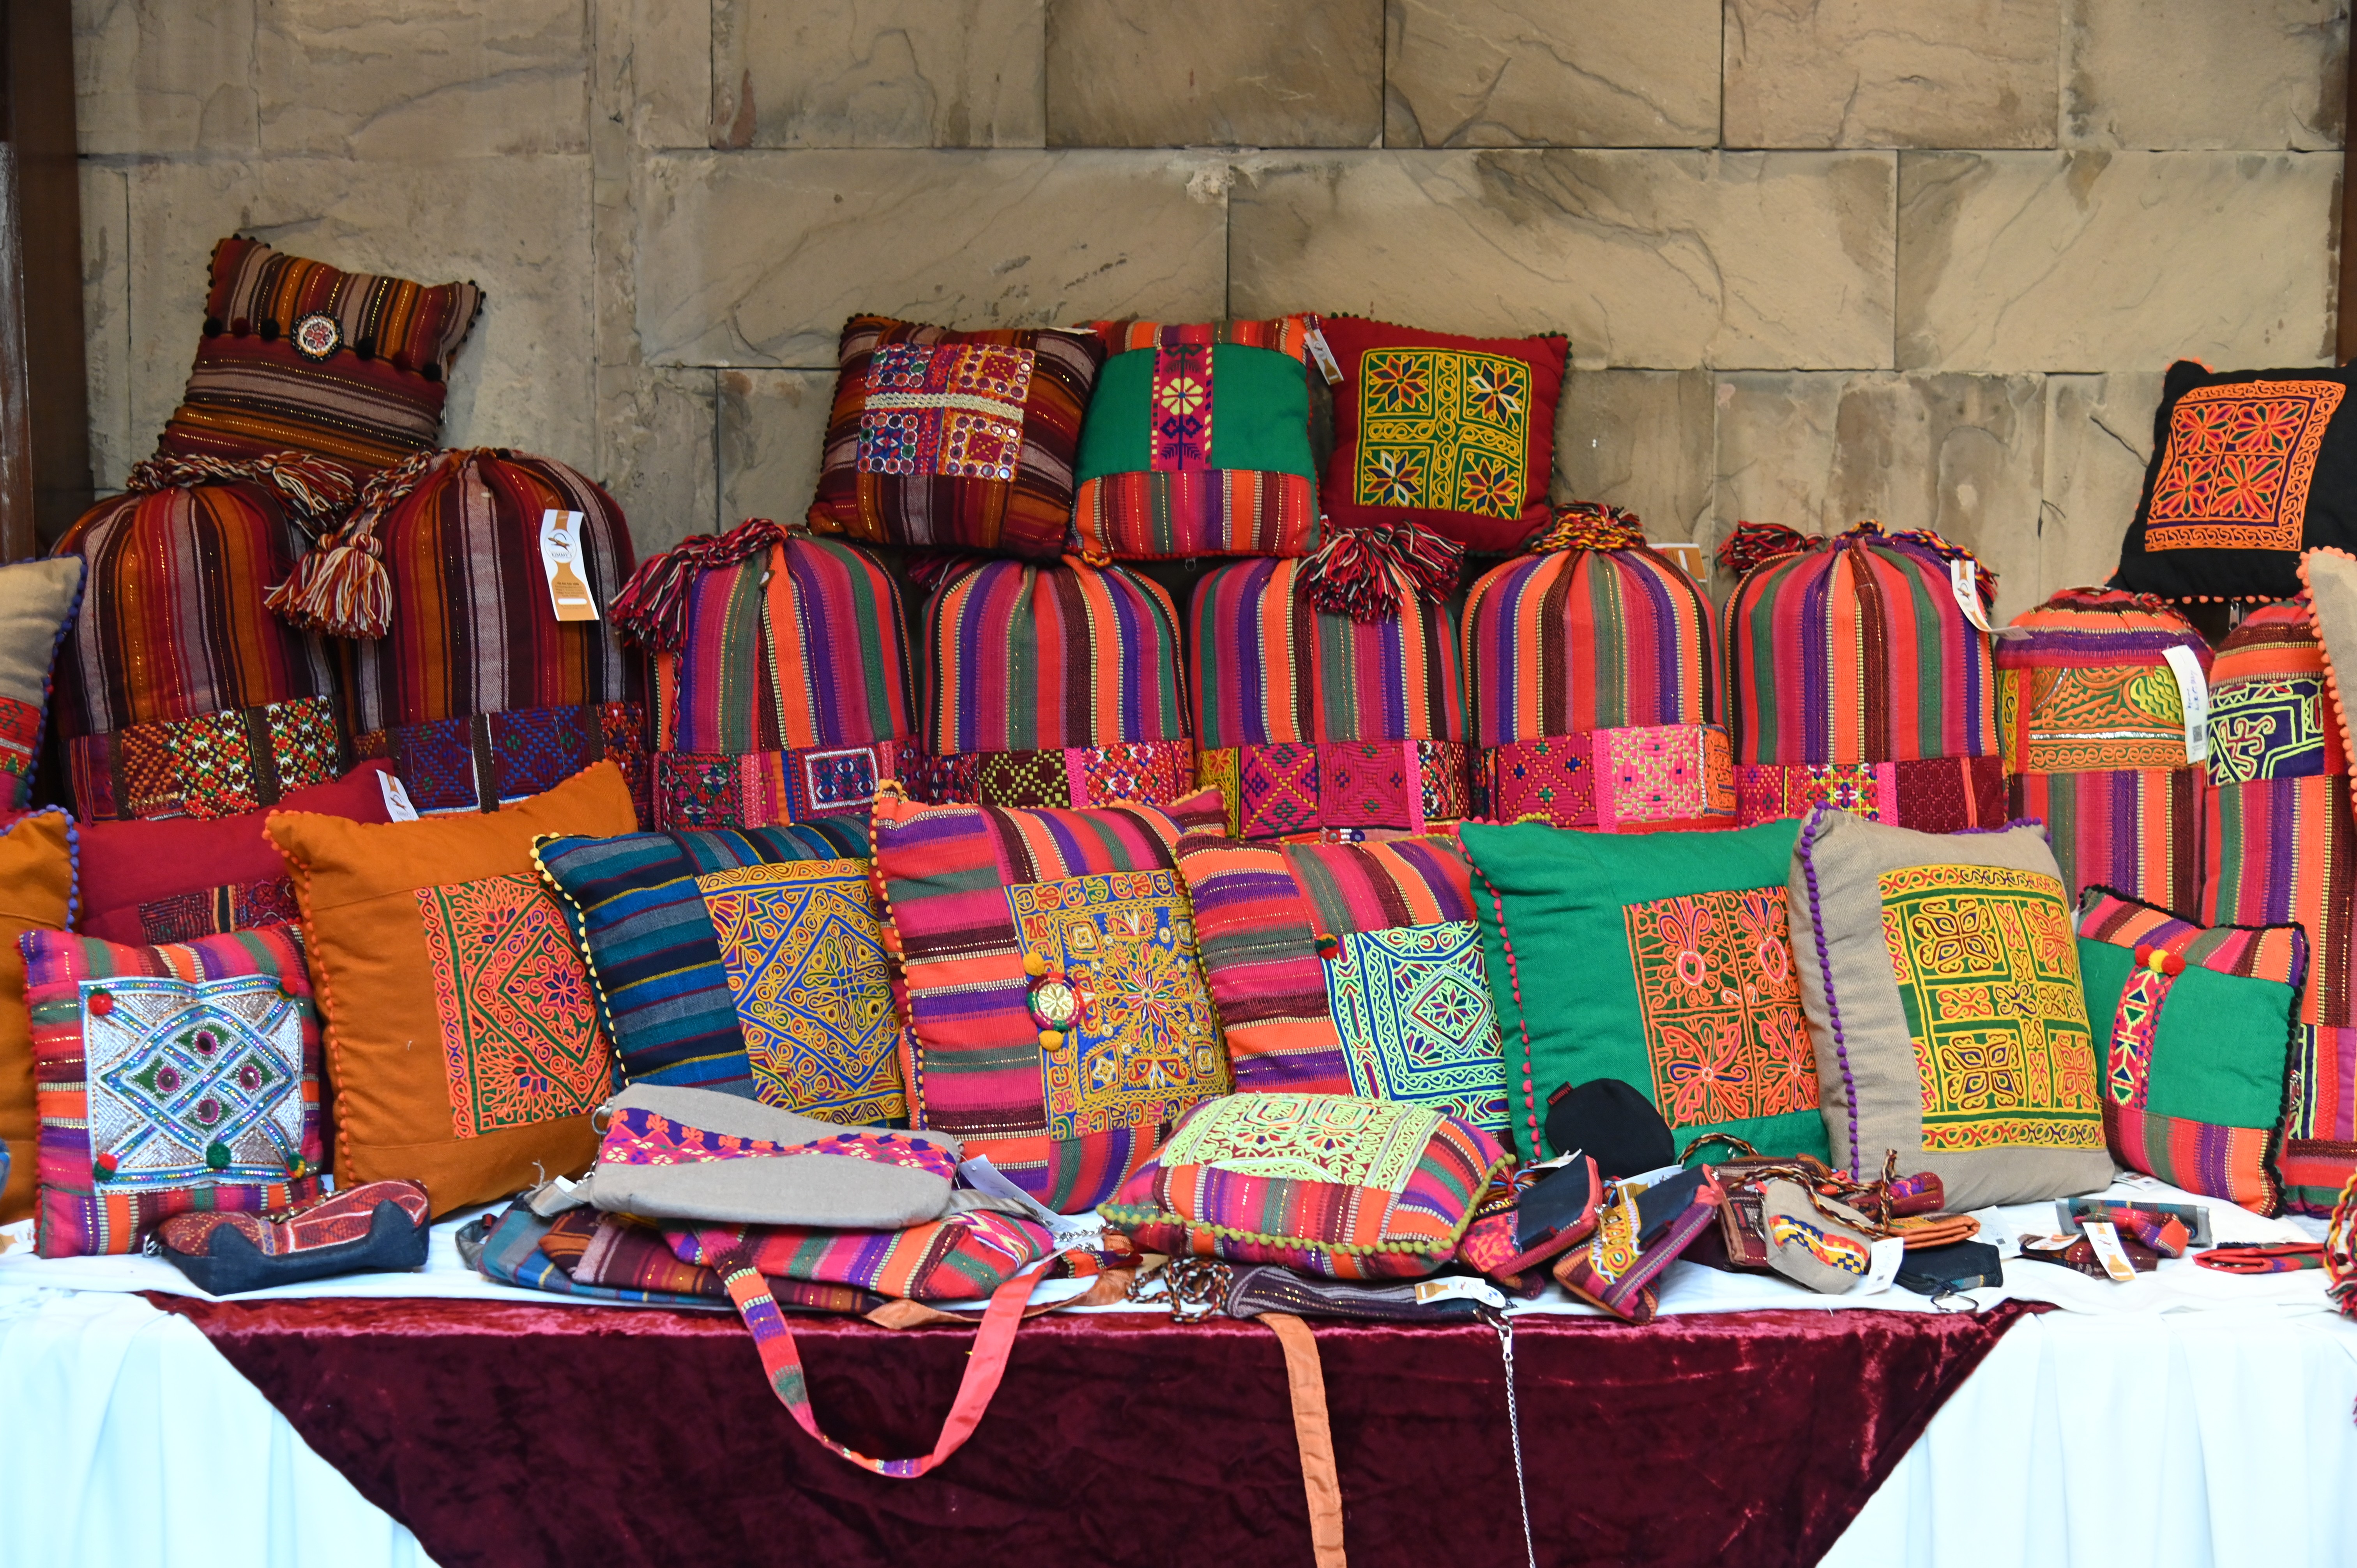 The colorful embroidered handbags and cushions